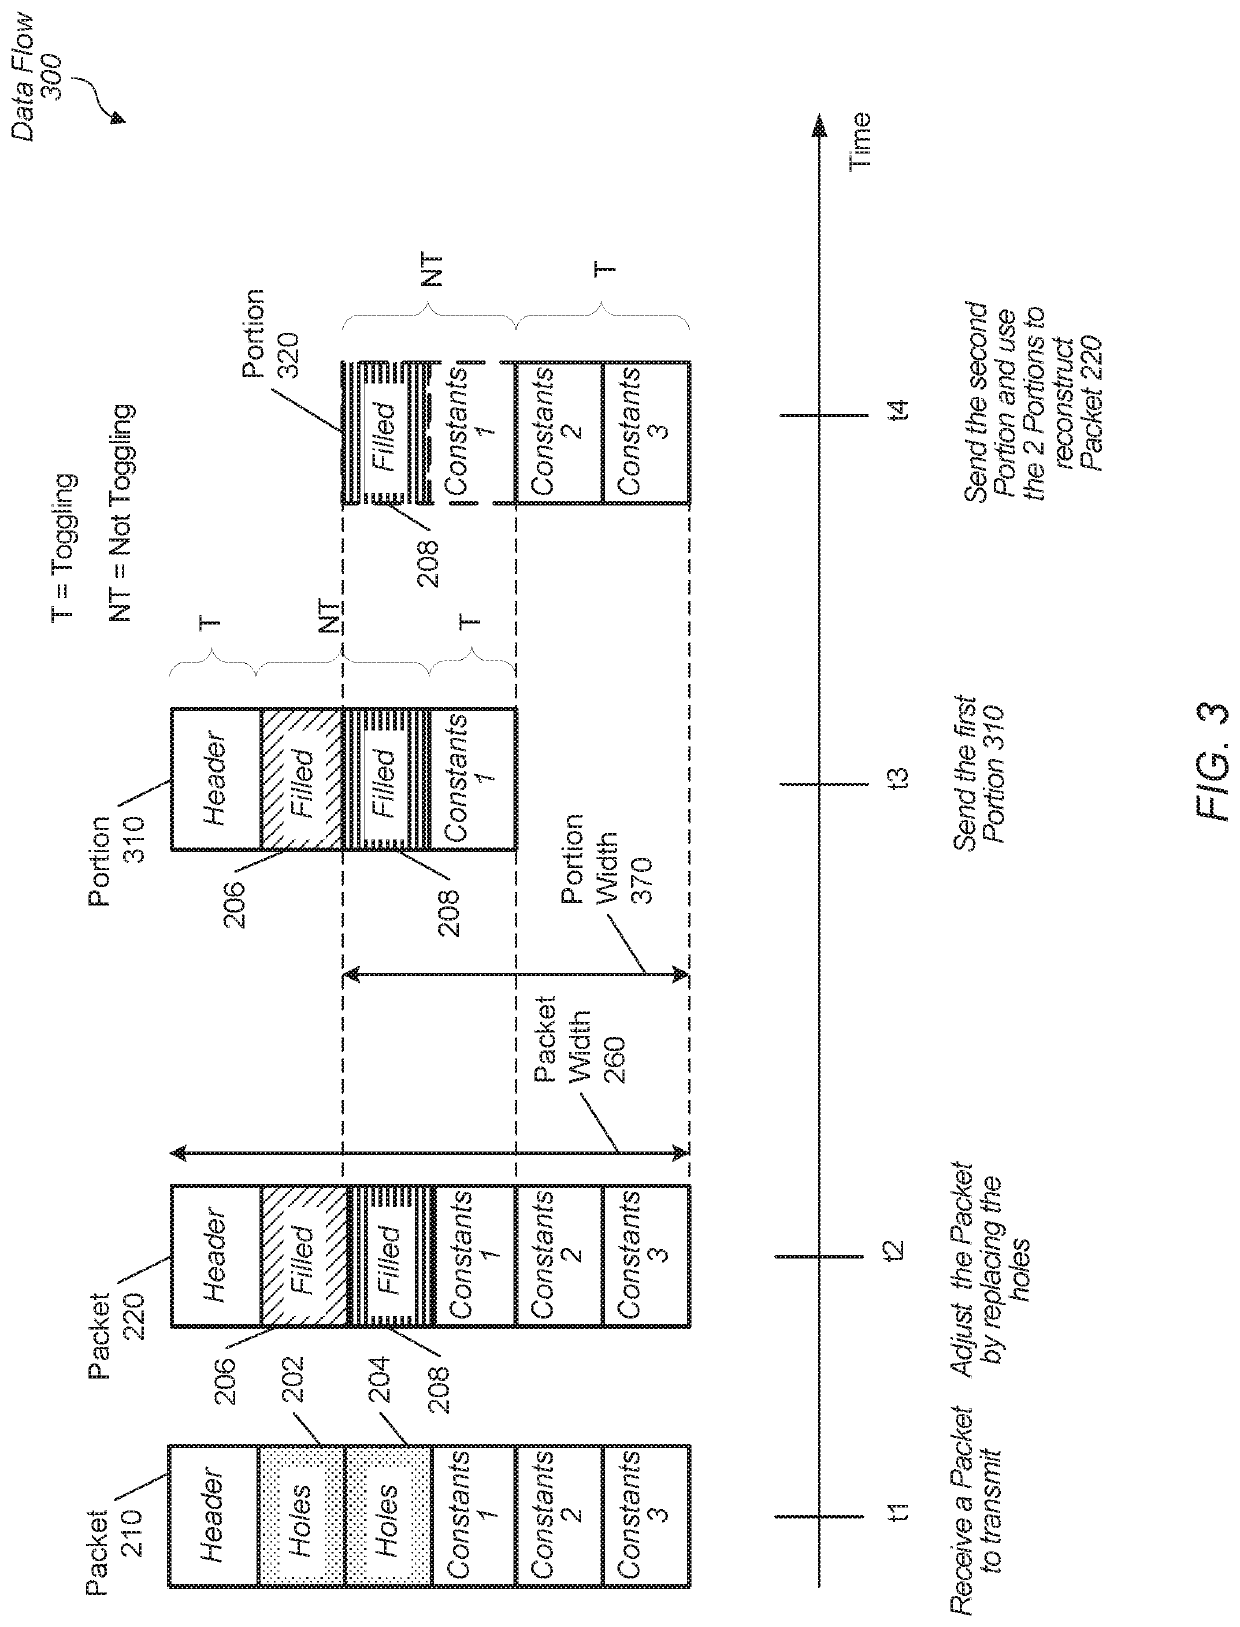 Power-oriented bus encoding for data transmission